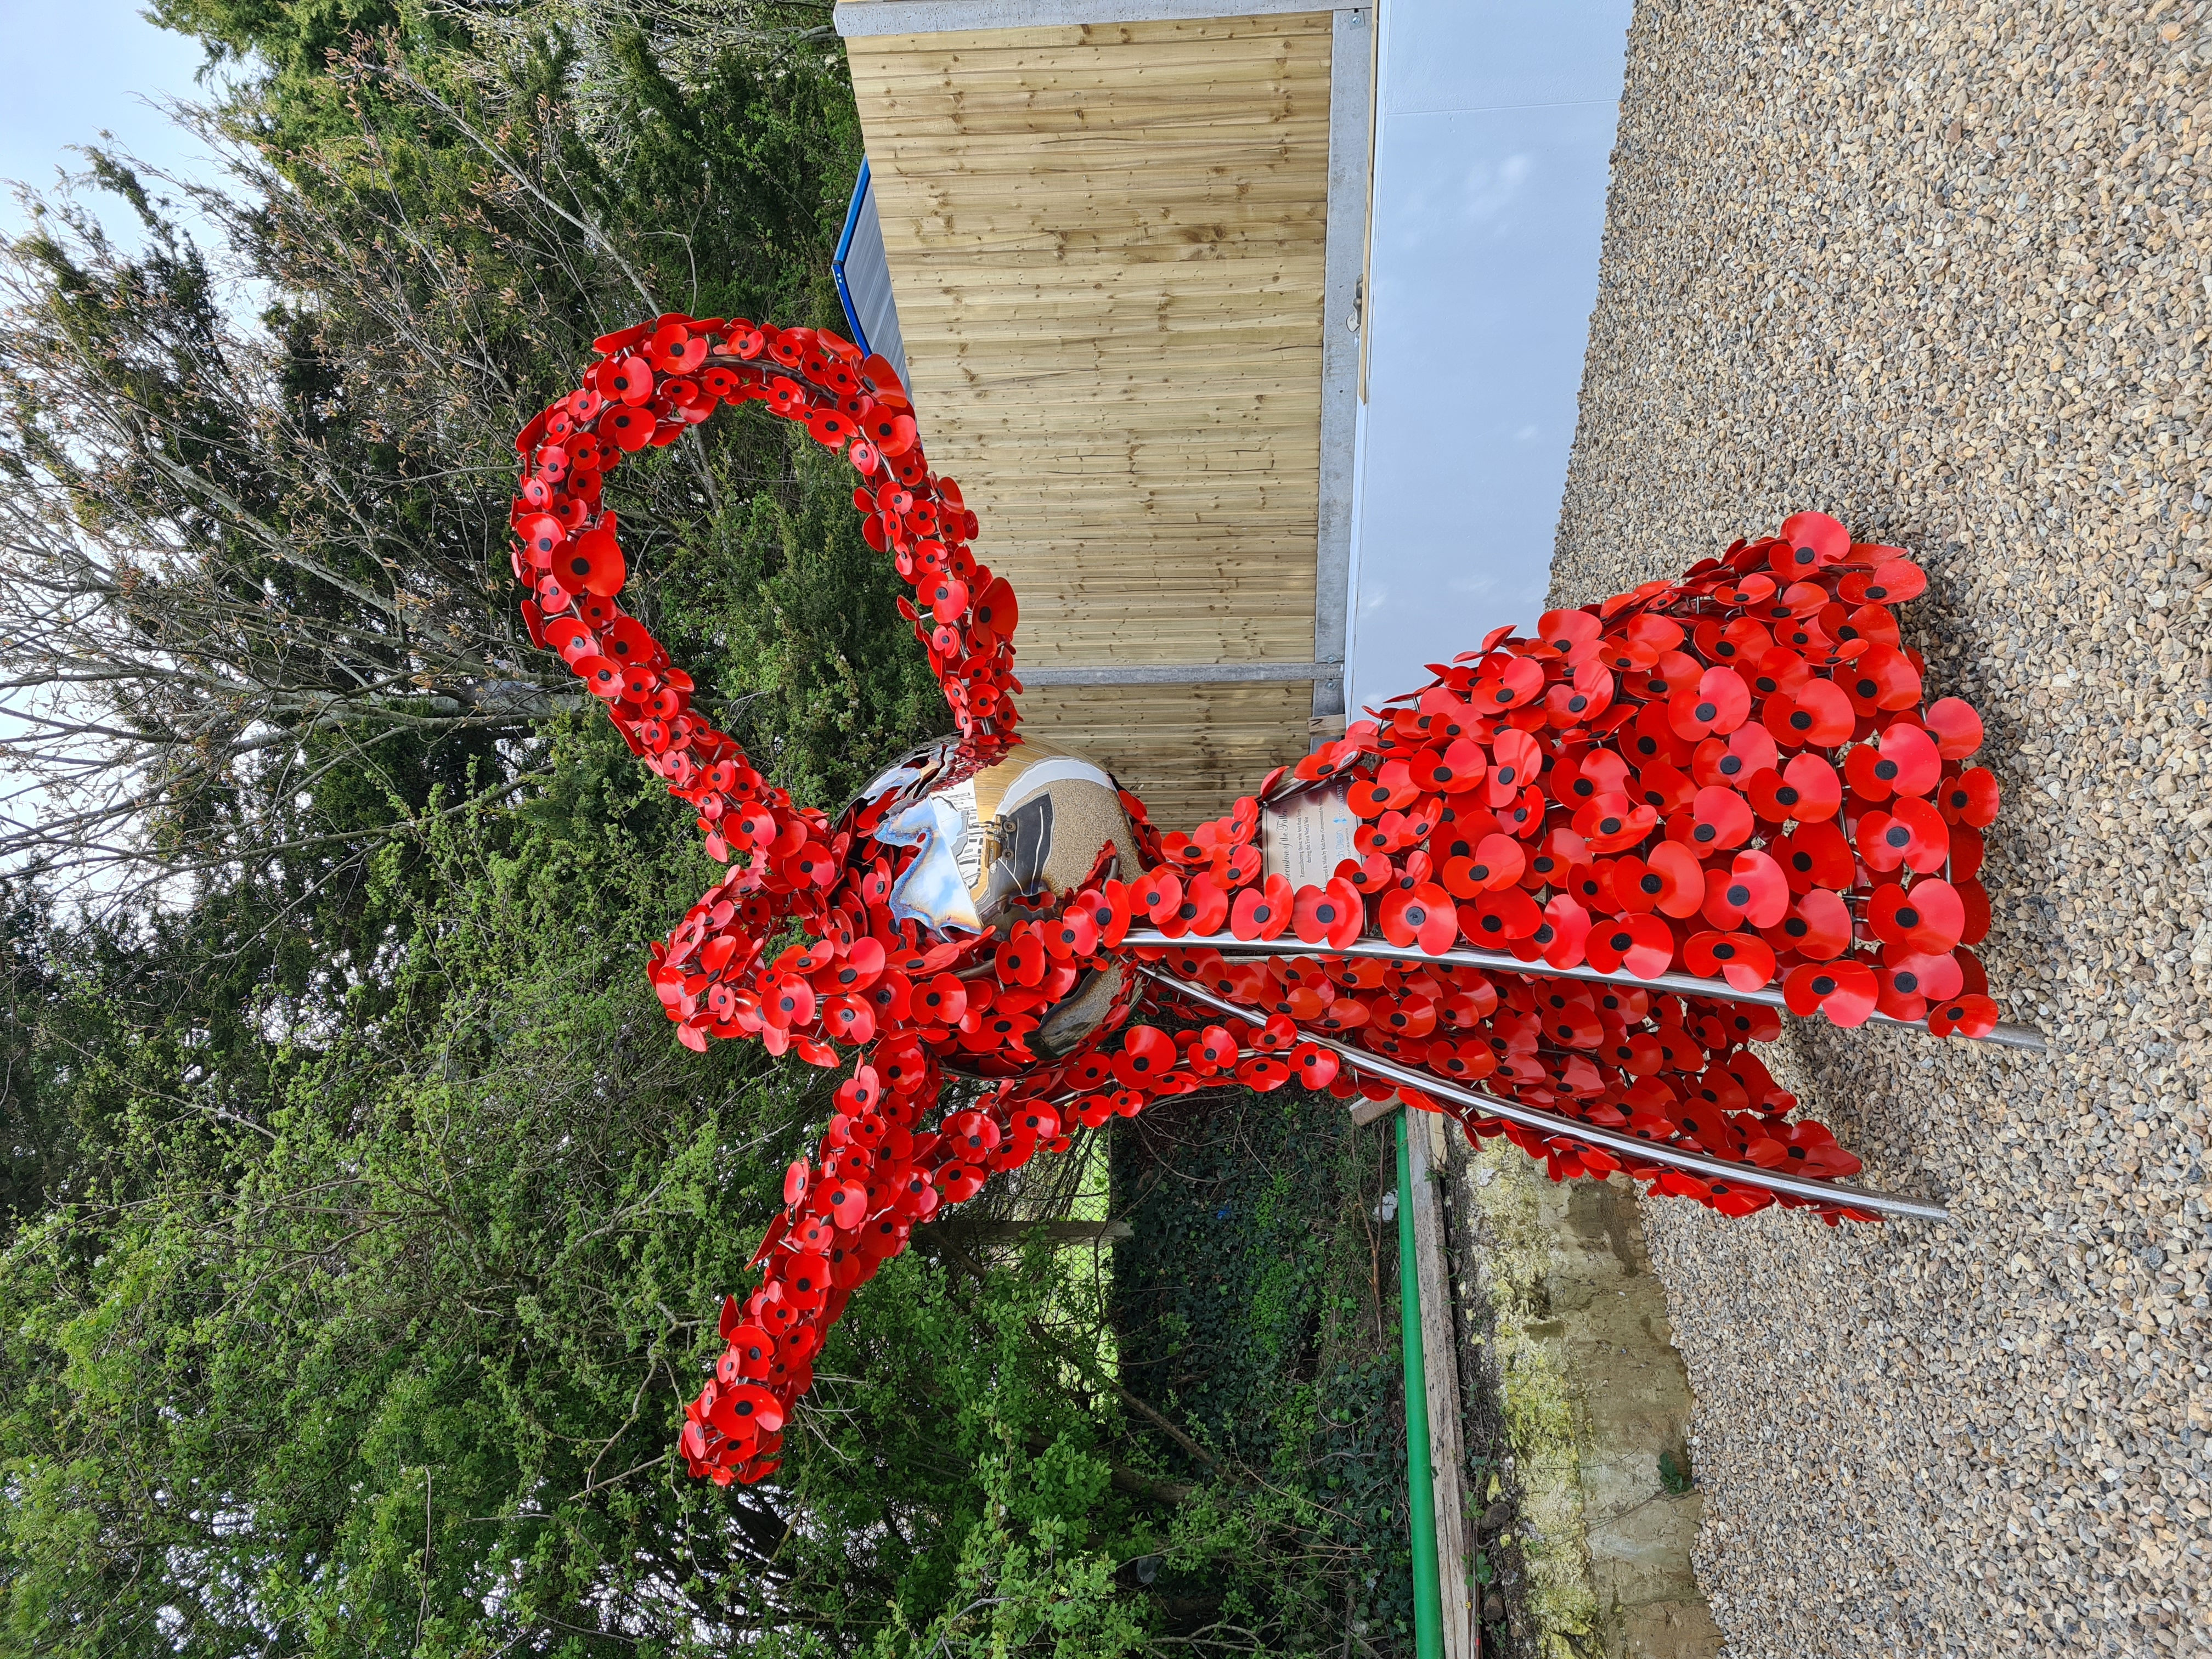 Angel sculpture made of red poppies titled Ascension of the Fallen 